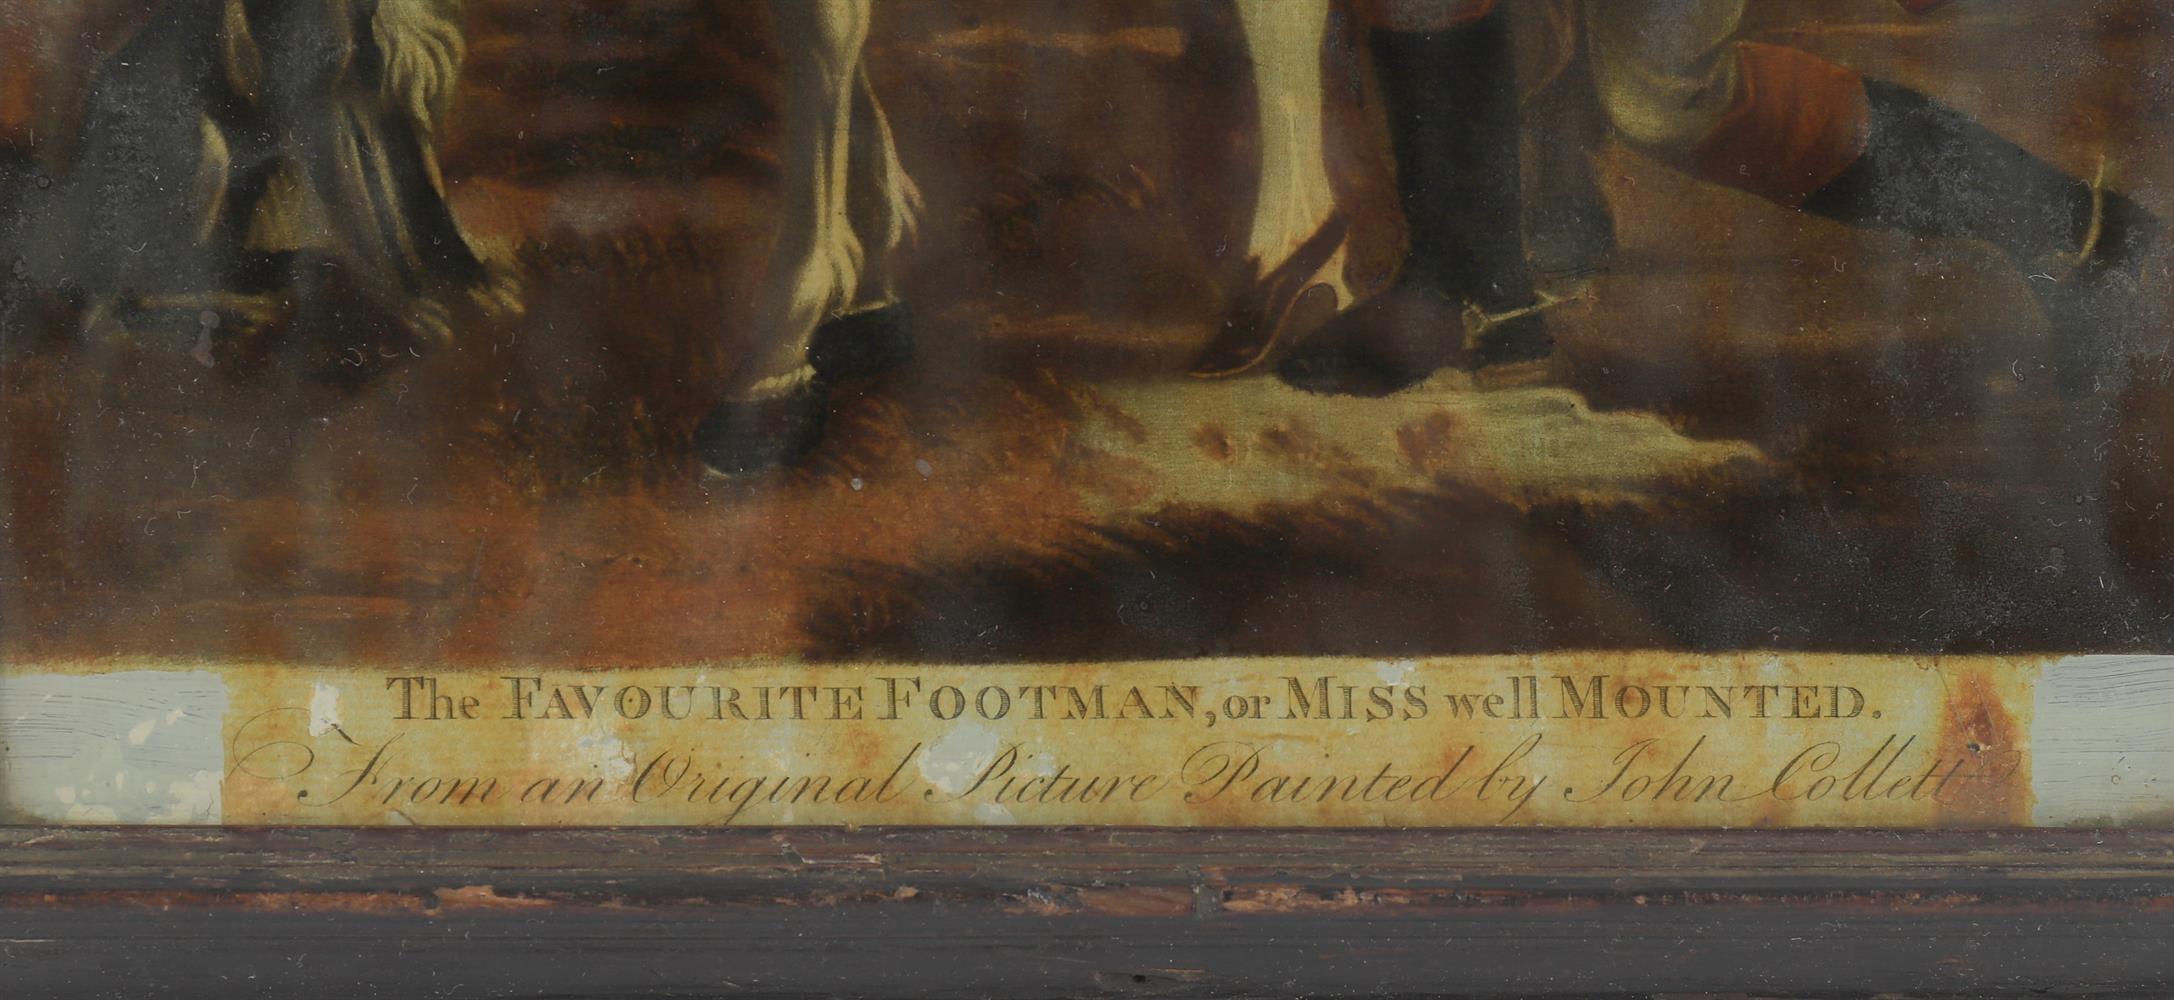 Three 19th century reverse prints on glass including 'The Favourite Footman or Miss Well Mounted' - Image 4 of 8